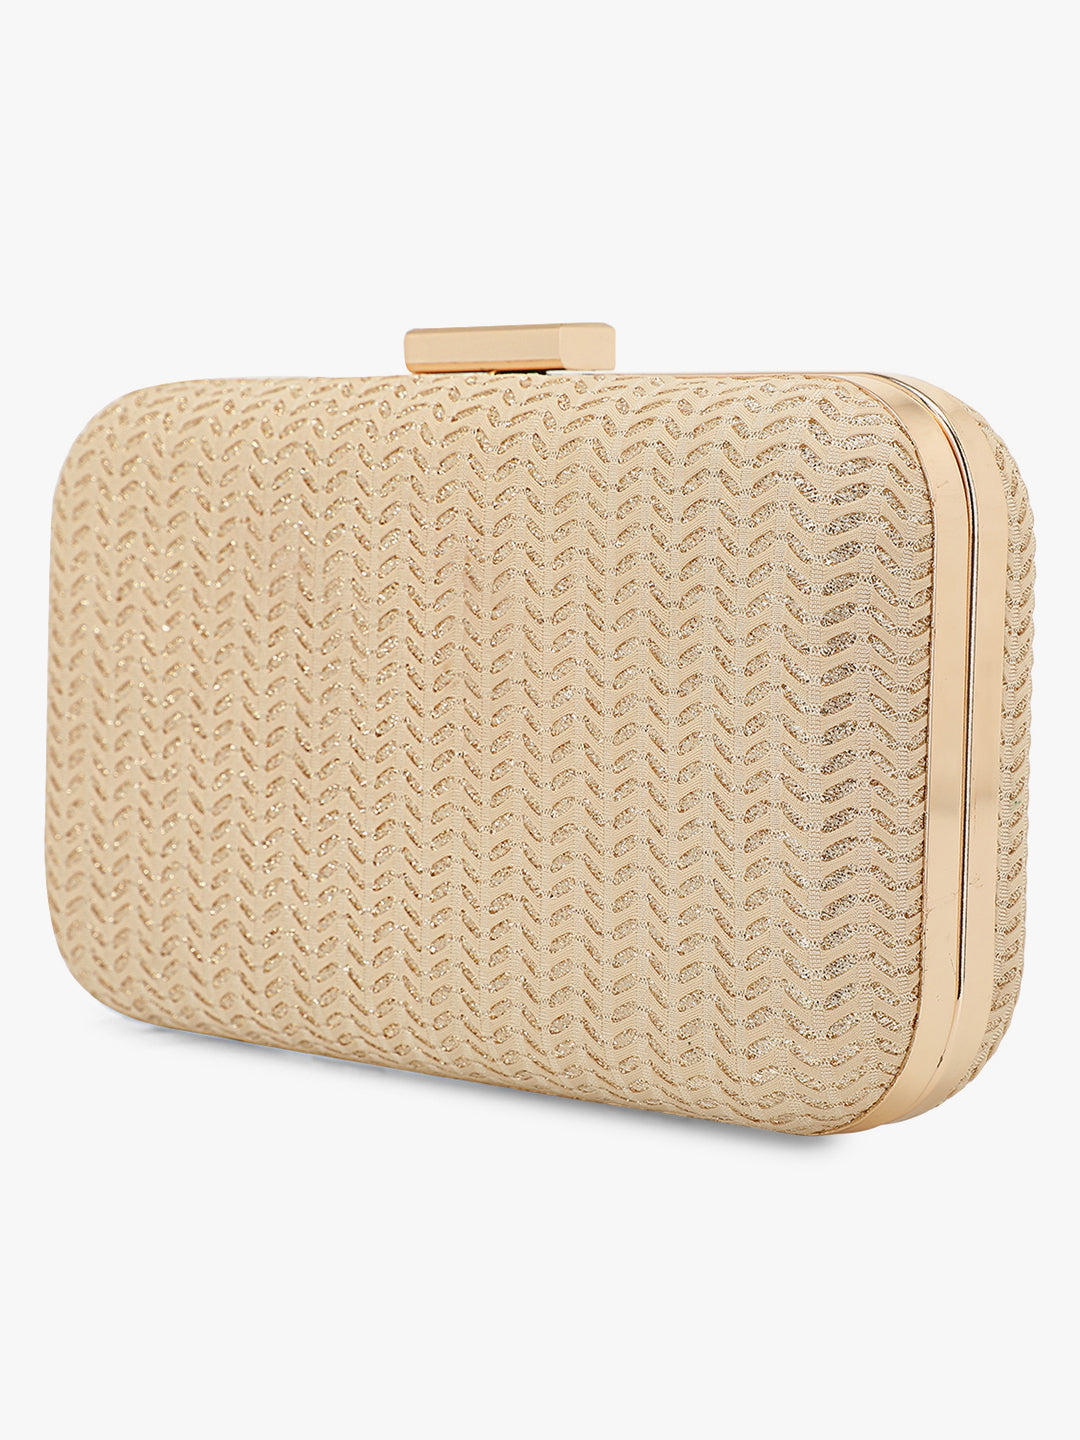 The shimmer gold clutch is the ultimate accessory to complement your impeccable style and leave a lasting impression.